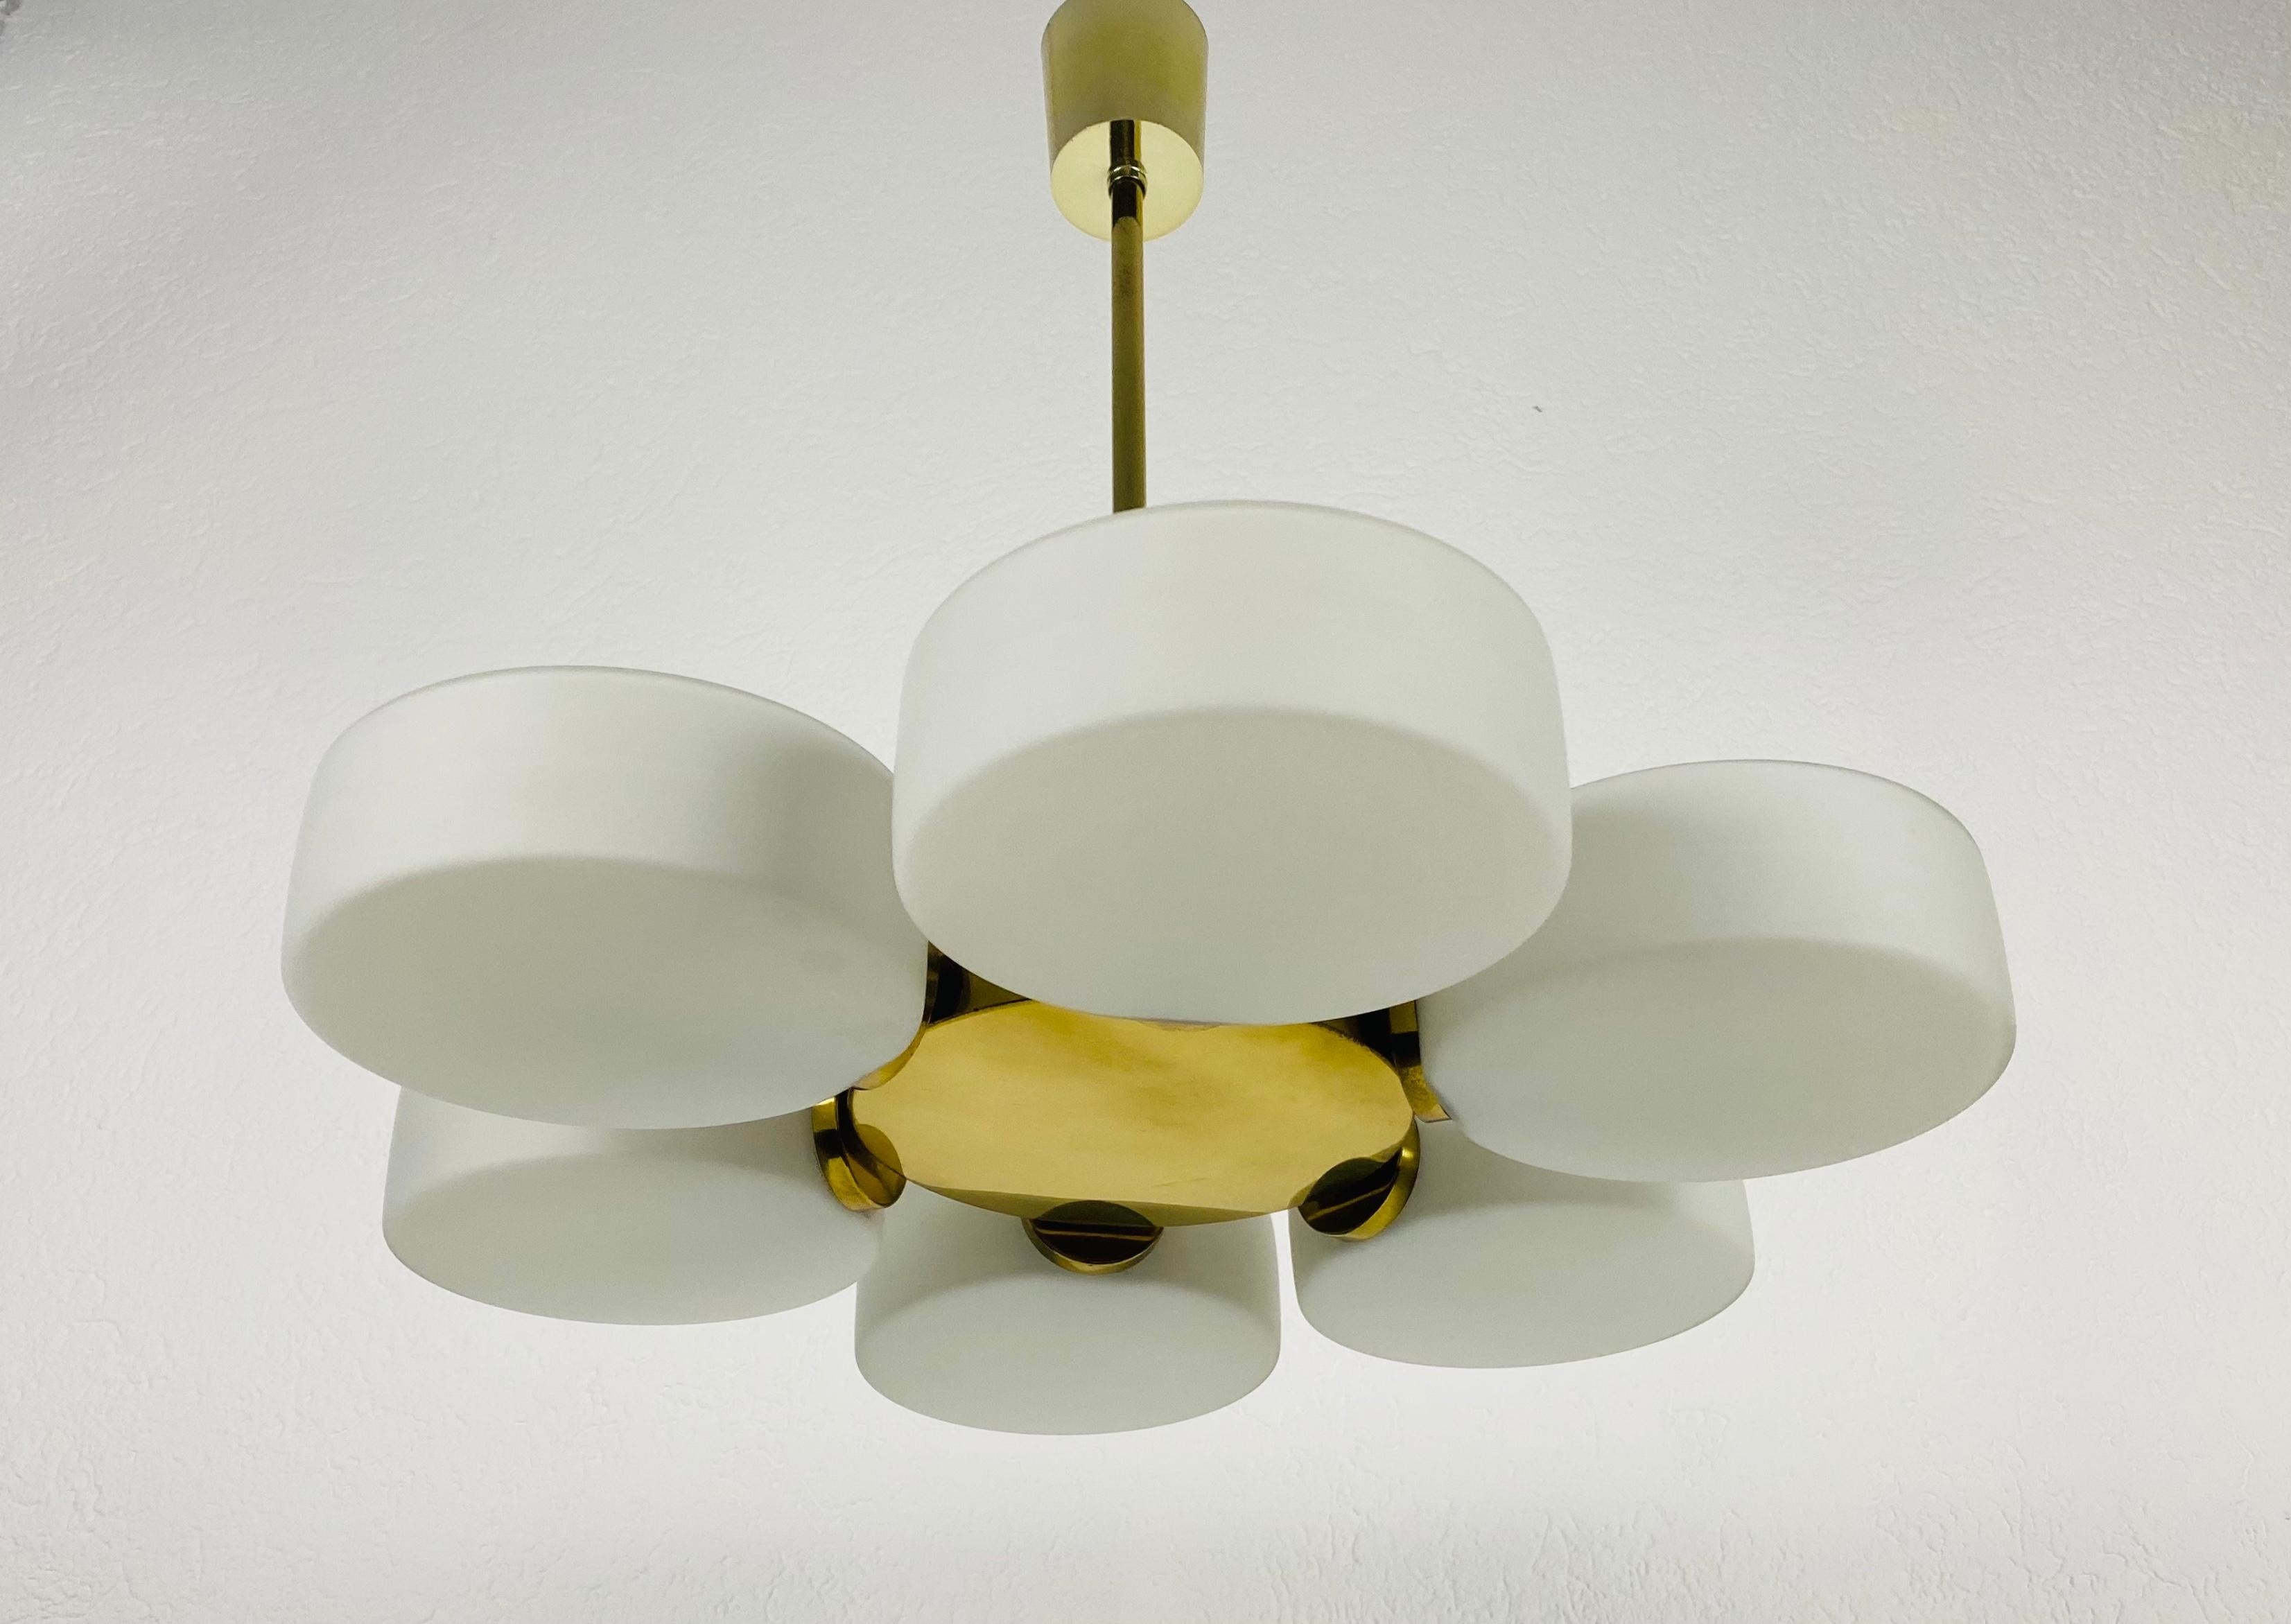 A midcentury chandelier by Kaiser Leuchten made in Germany in the 1960s. It is fascinating with its Space Age design and six opaline glass balls. The circular body of the light is made of polished brass, including the arms. 

Good vintage